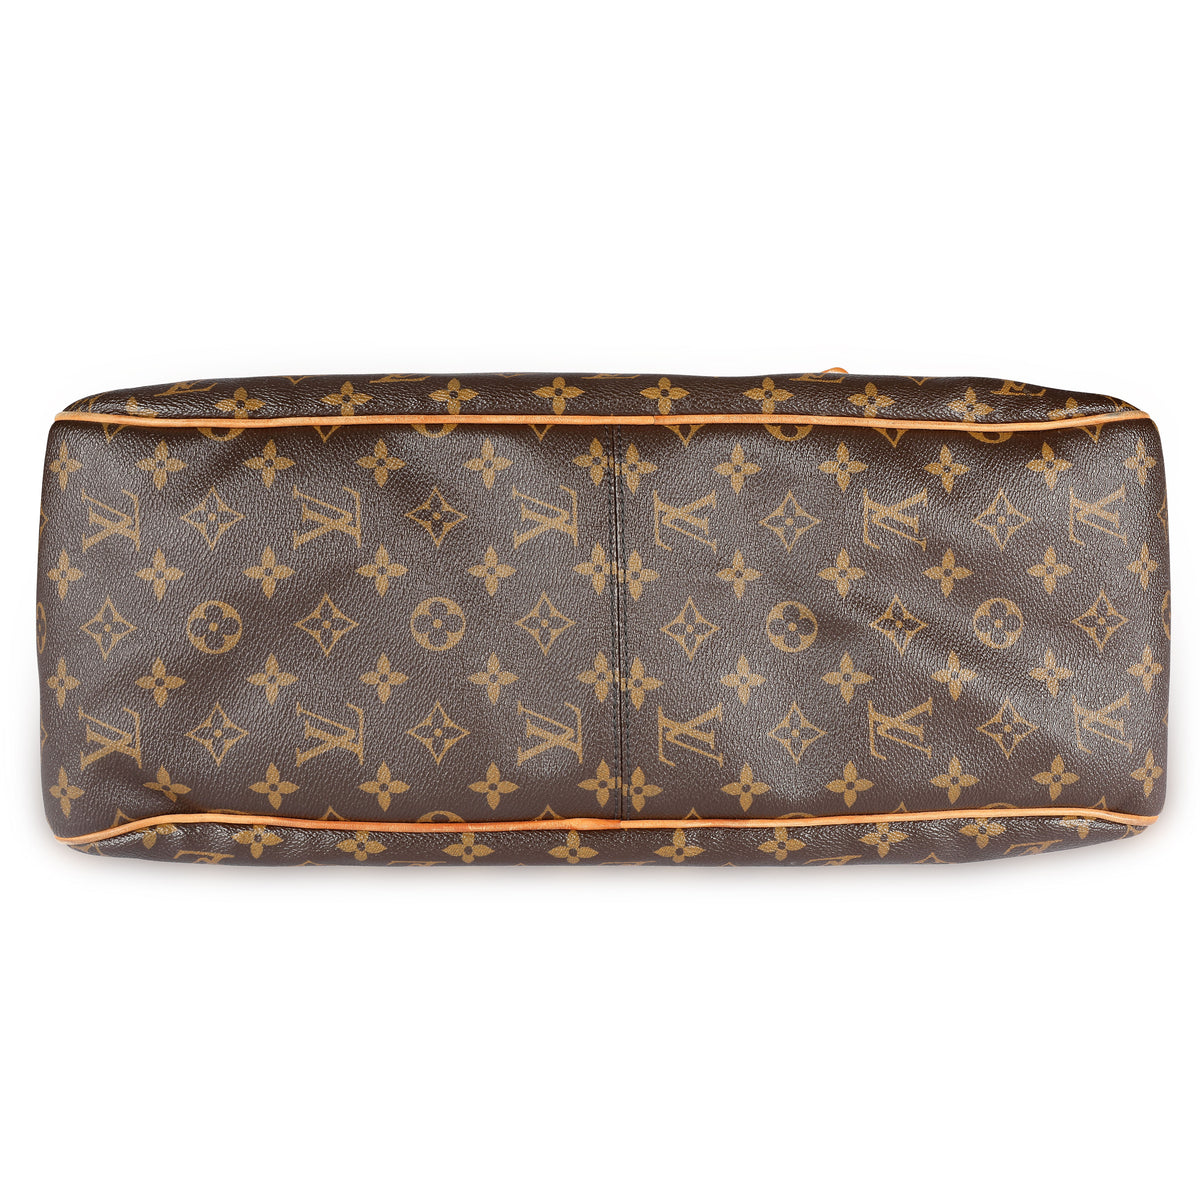 Louis Vuitton Tahiti GM Clemence Leather Round Wallet